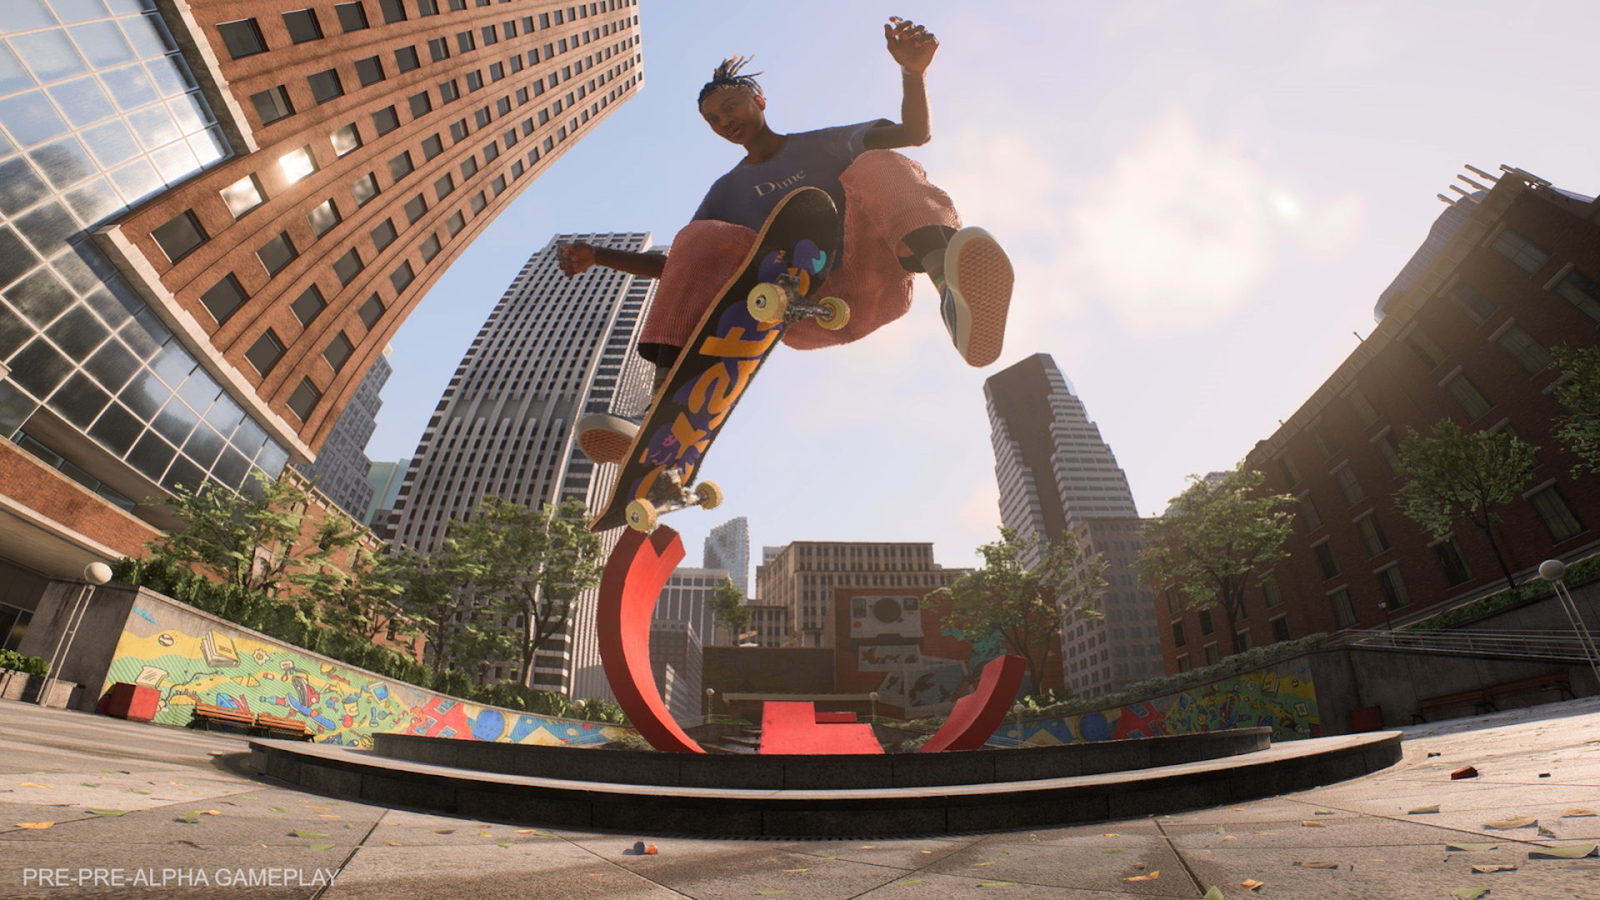 How to sign-up and access the Skate 4 playtest